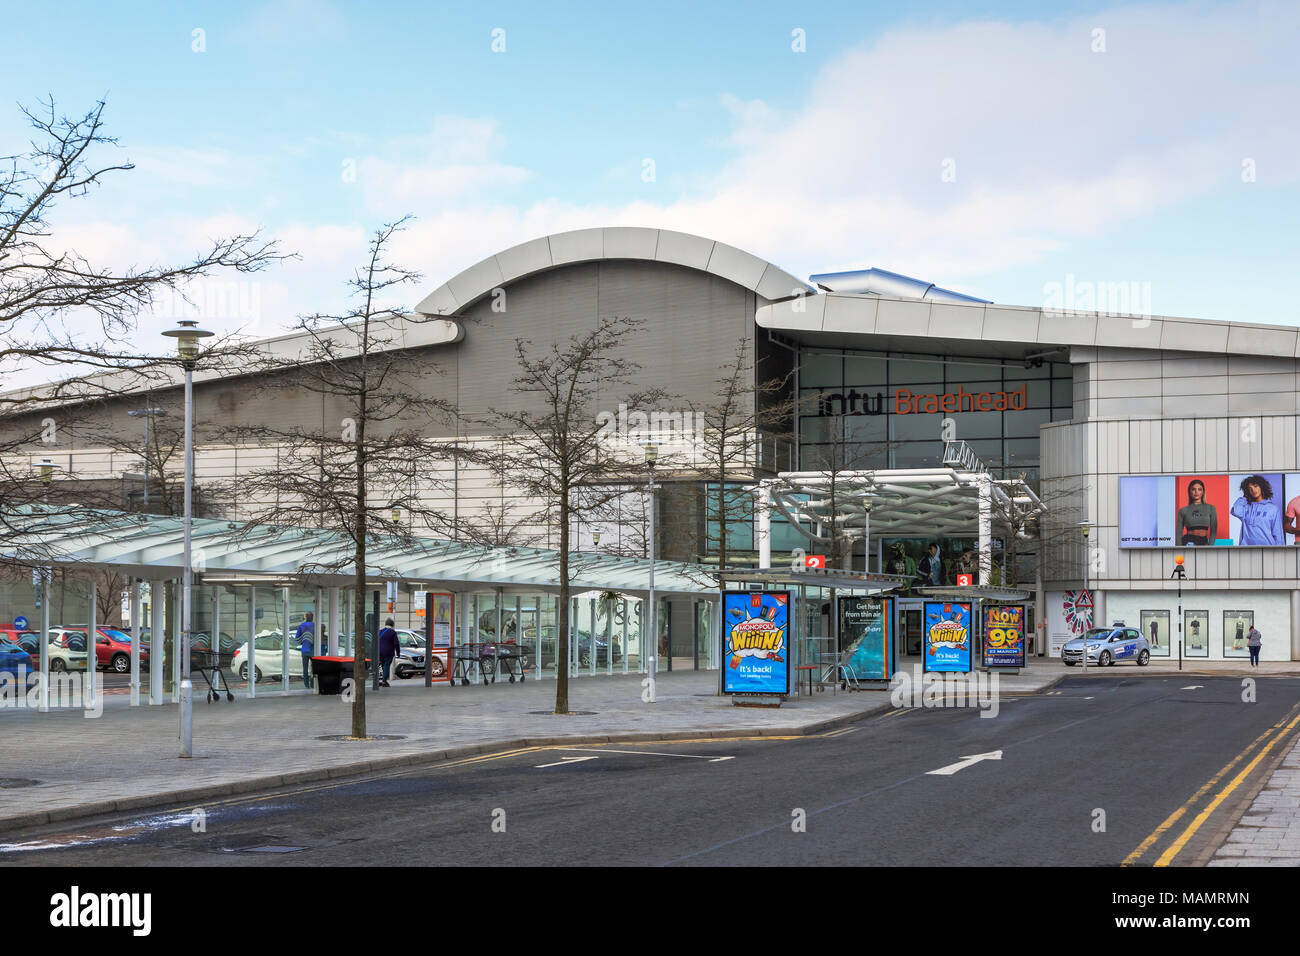 East entrance to INTU Braehead shopping centre with bus stops, Braehead, Glasgow Stock Photo